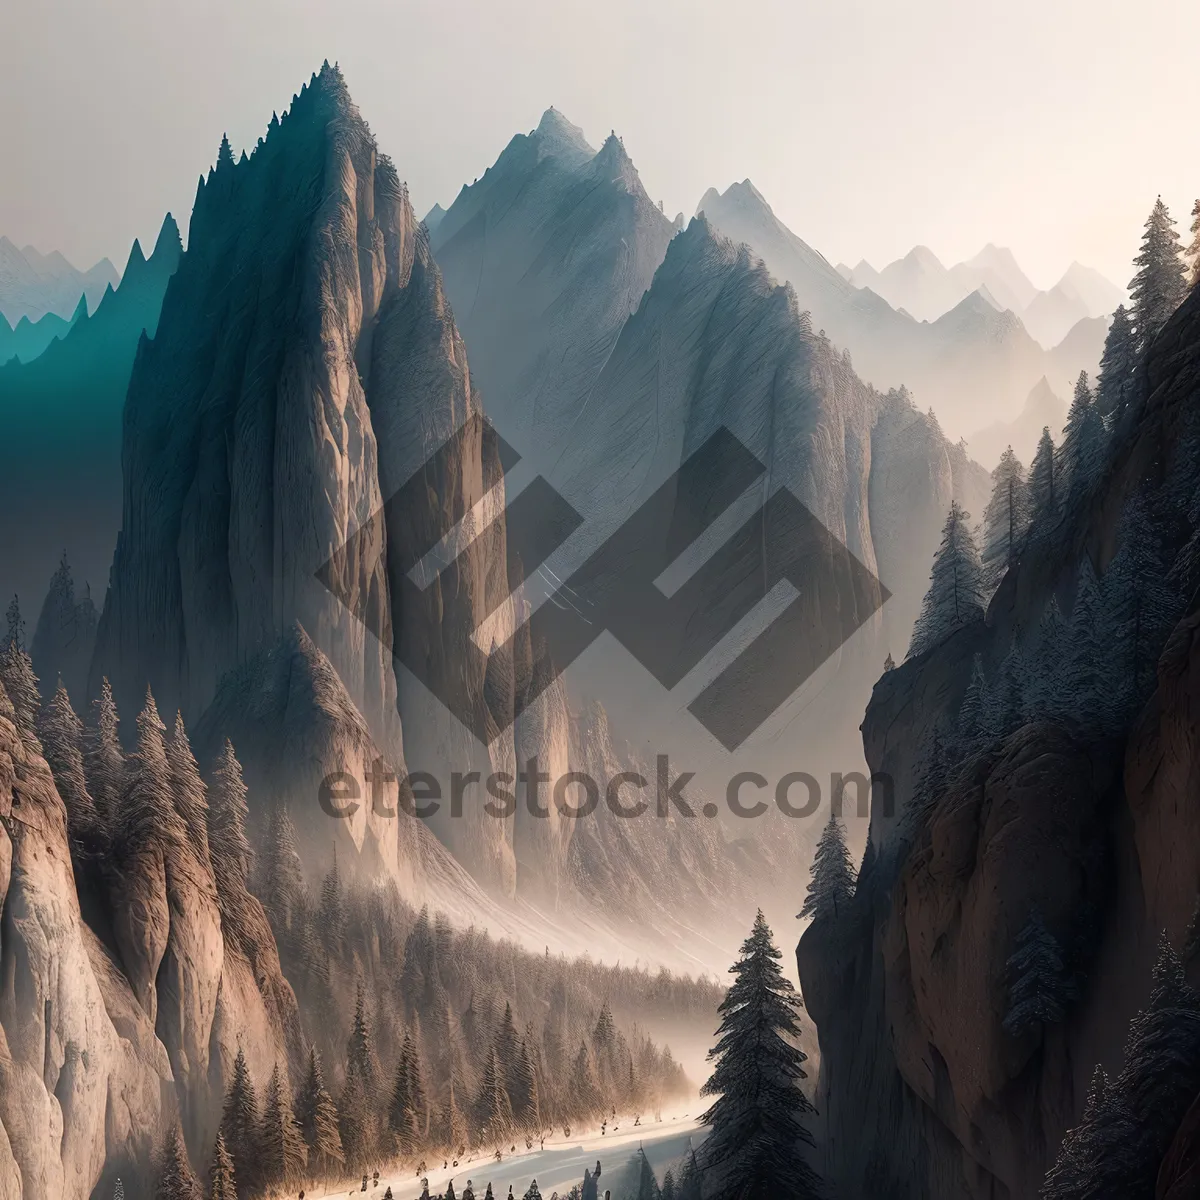 Picture of Snowy Peaks and Majestic Valleys